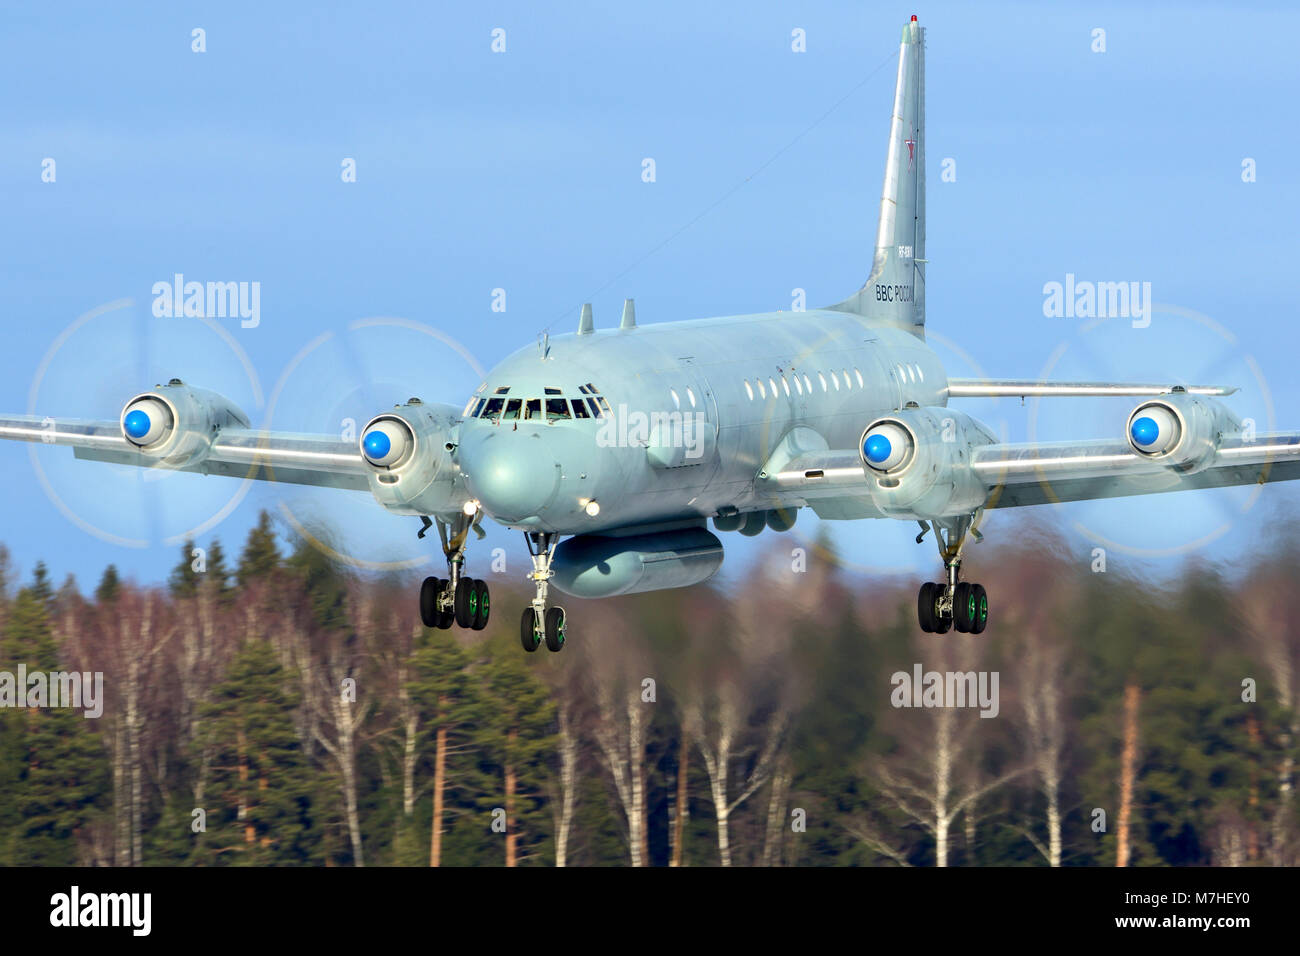 IL-20M reconnaissance aircraft of the Russian Air Force landing Stock Photo  - Alamy